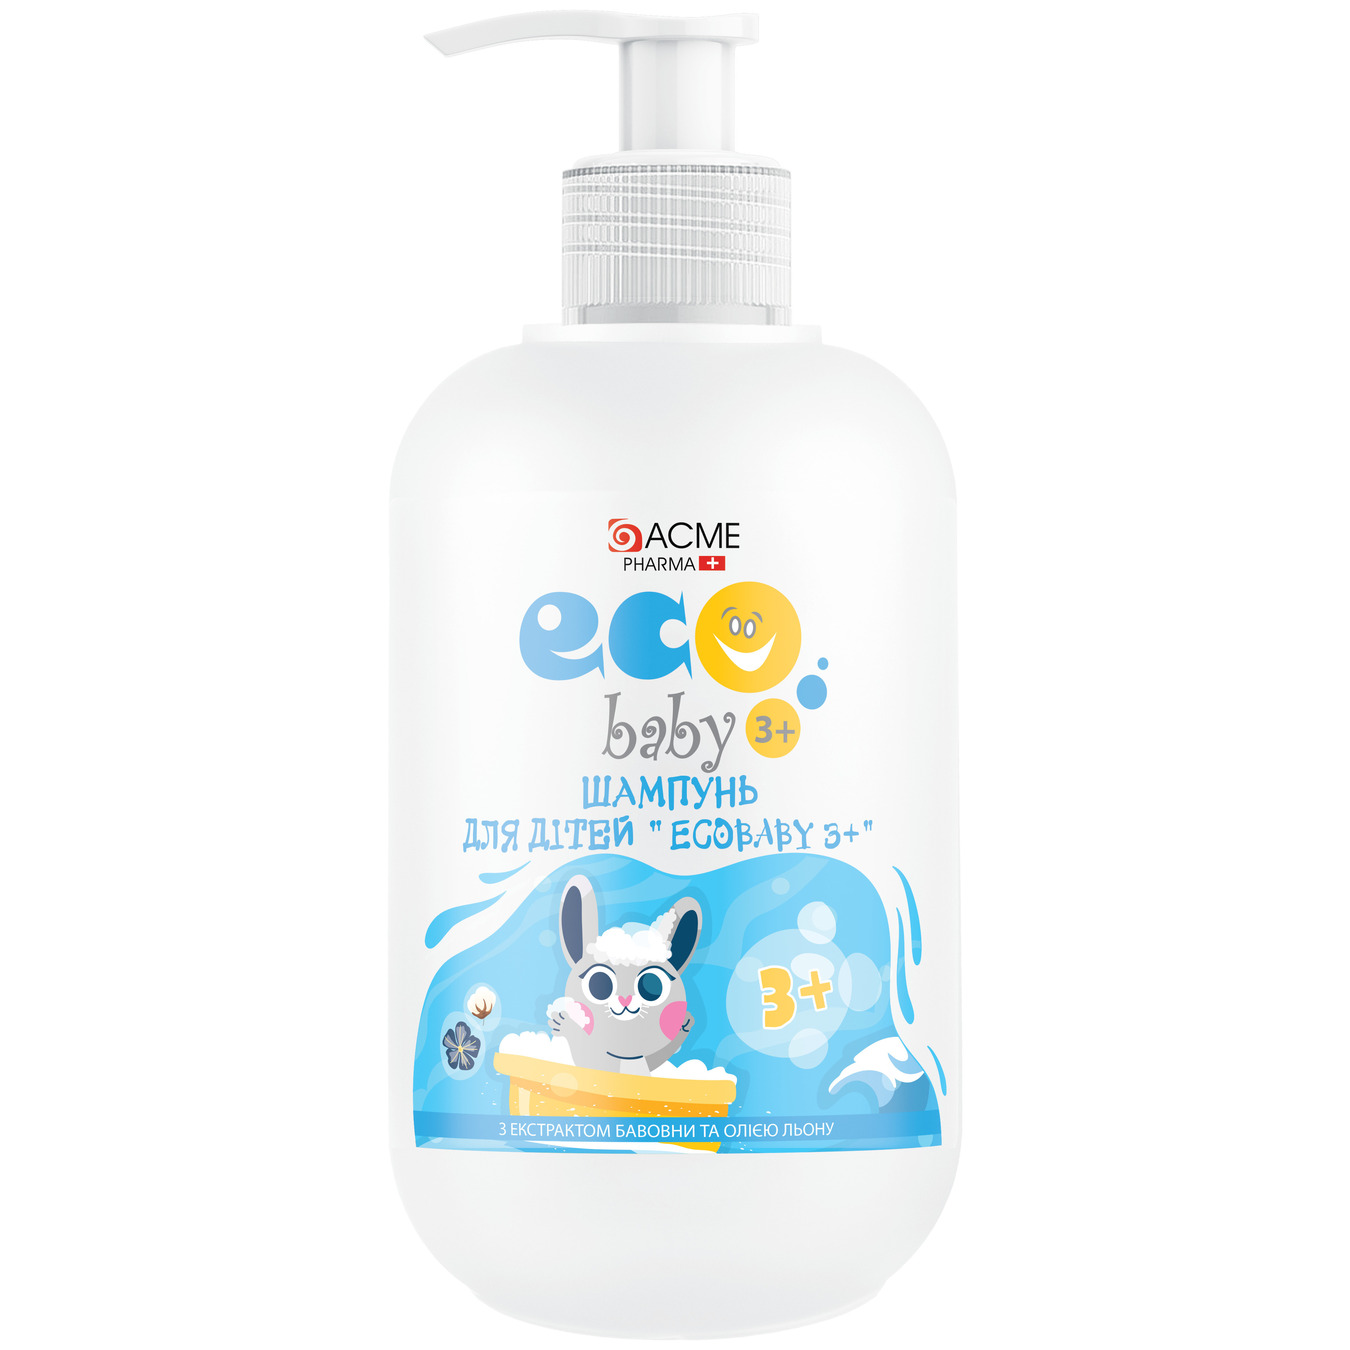 EcoBaby shampoo for kids 3+ with cotton extract and flax oil 500ml